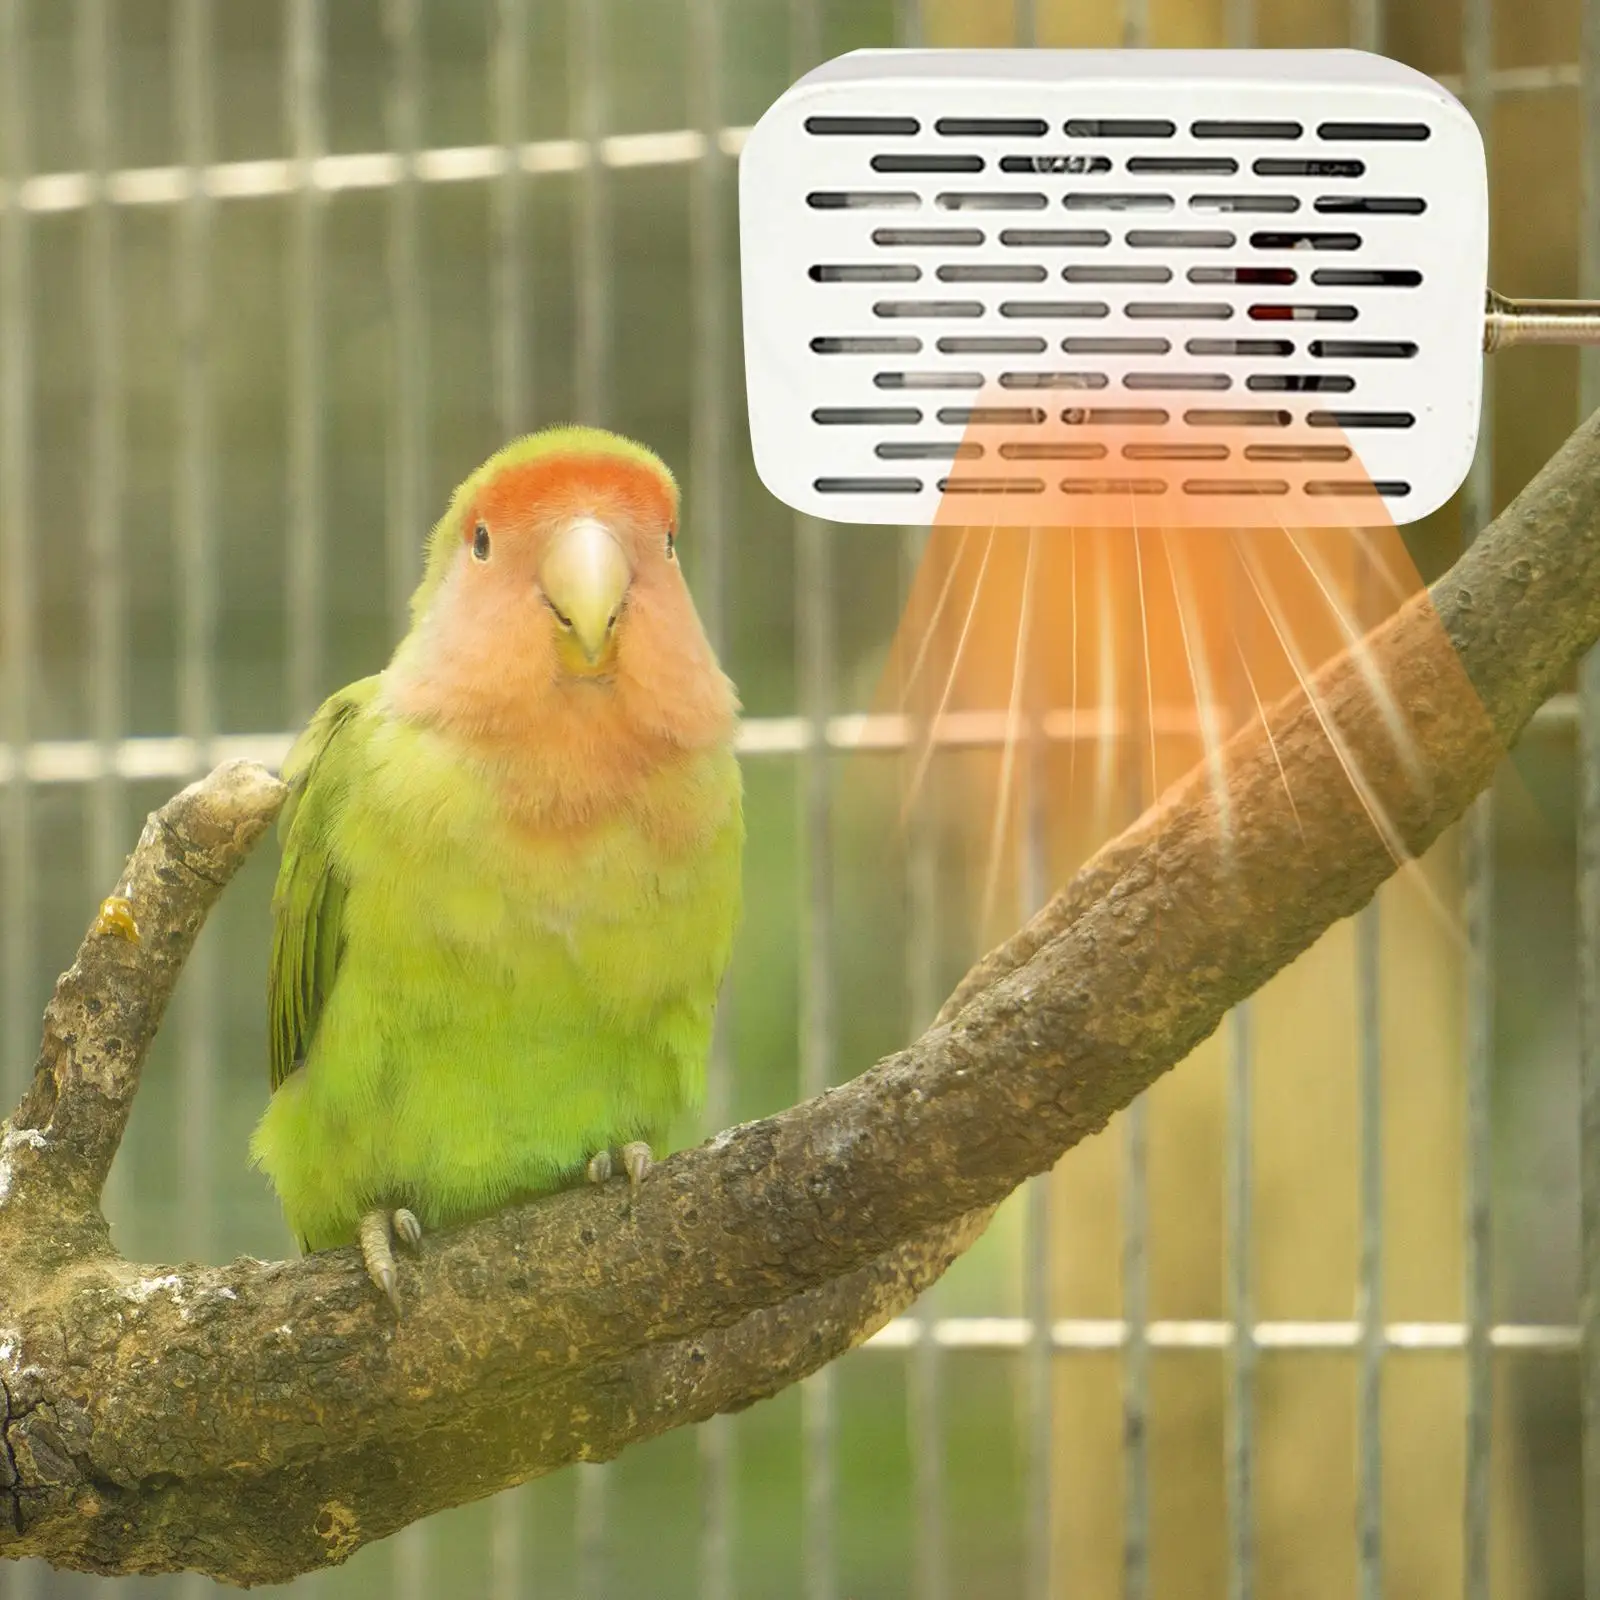 Bird Cage Heater Winter Birds Perch Stand Warmer Bird Heat Lamp with Lampshade for Frogs Lizards Turtles Parakeets Reptiles